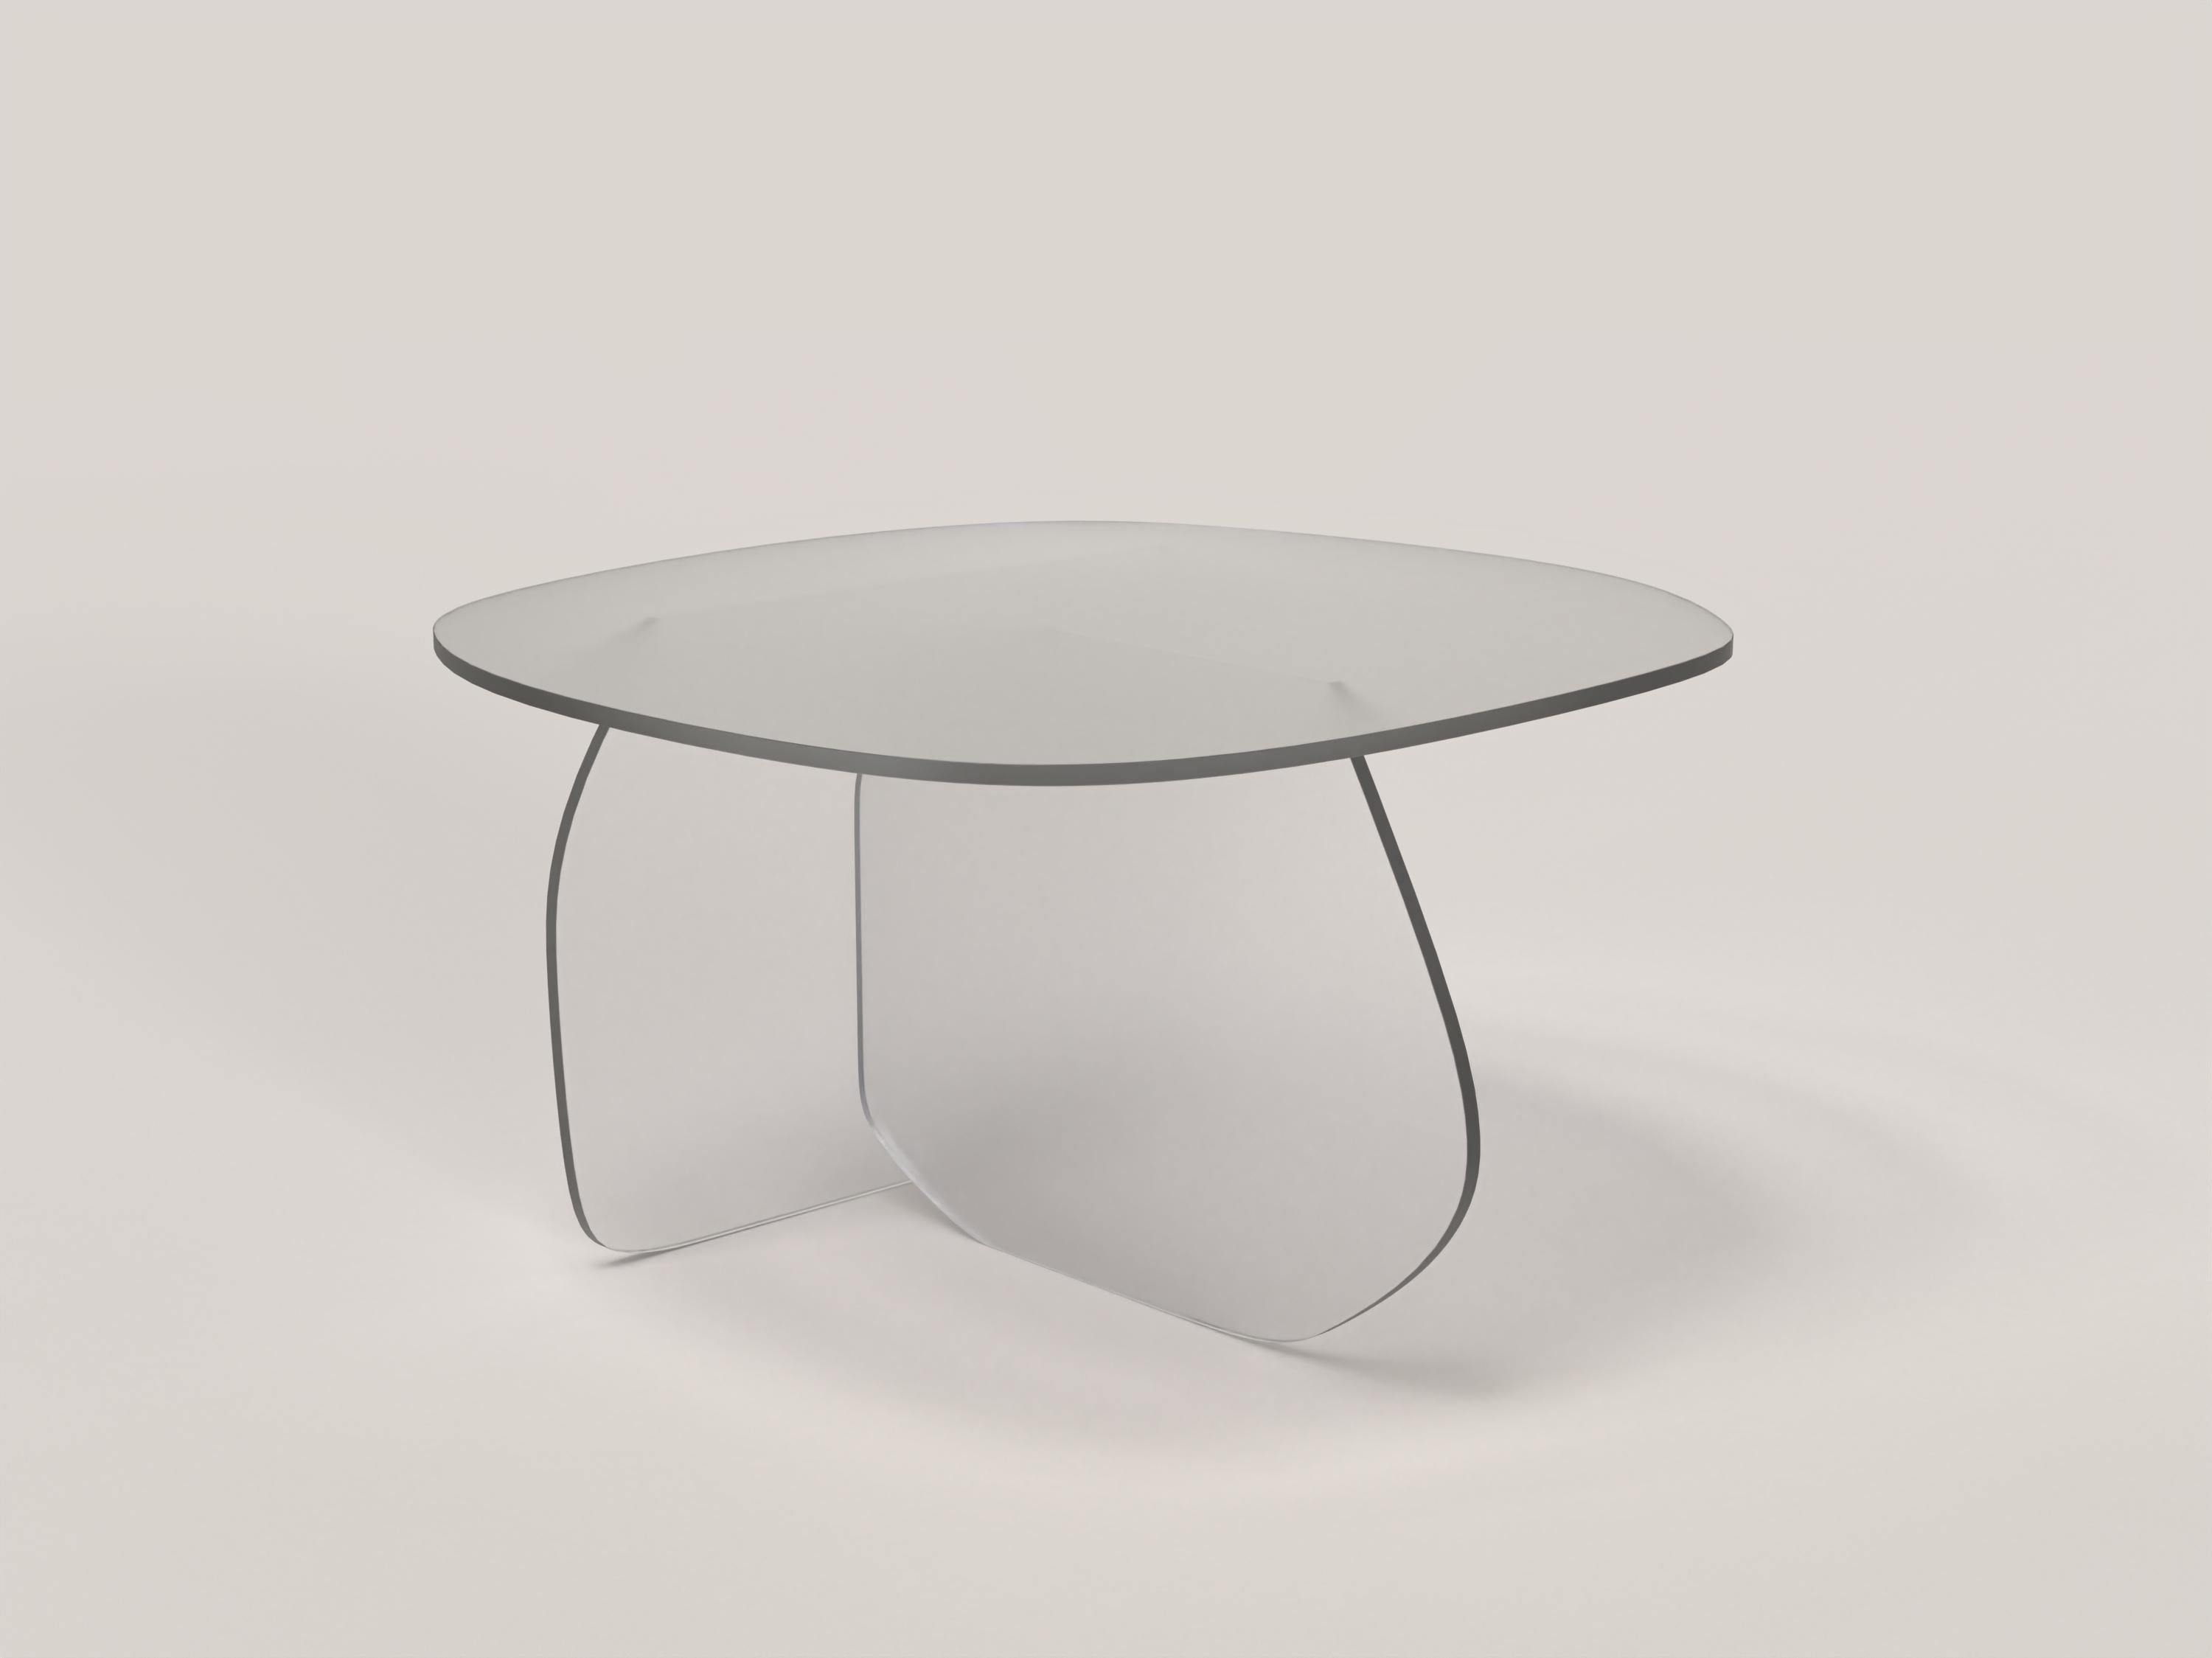 Panorama V2 Coffee Table by Edizione Limitata
Limited Edition of 1000 pieces. Signed and numbered.
Dimensions: D 60 x W 59 x H 33 cm
Materials: Satin transparent tempered glass.

Panorama V1 and V2 are respectively contemporary side and low table